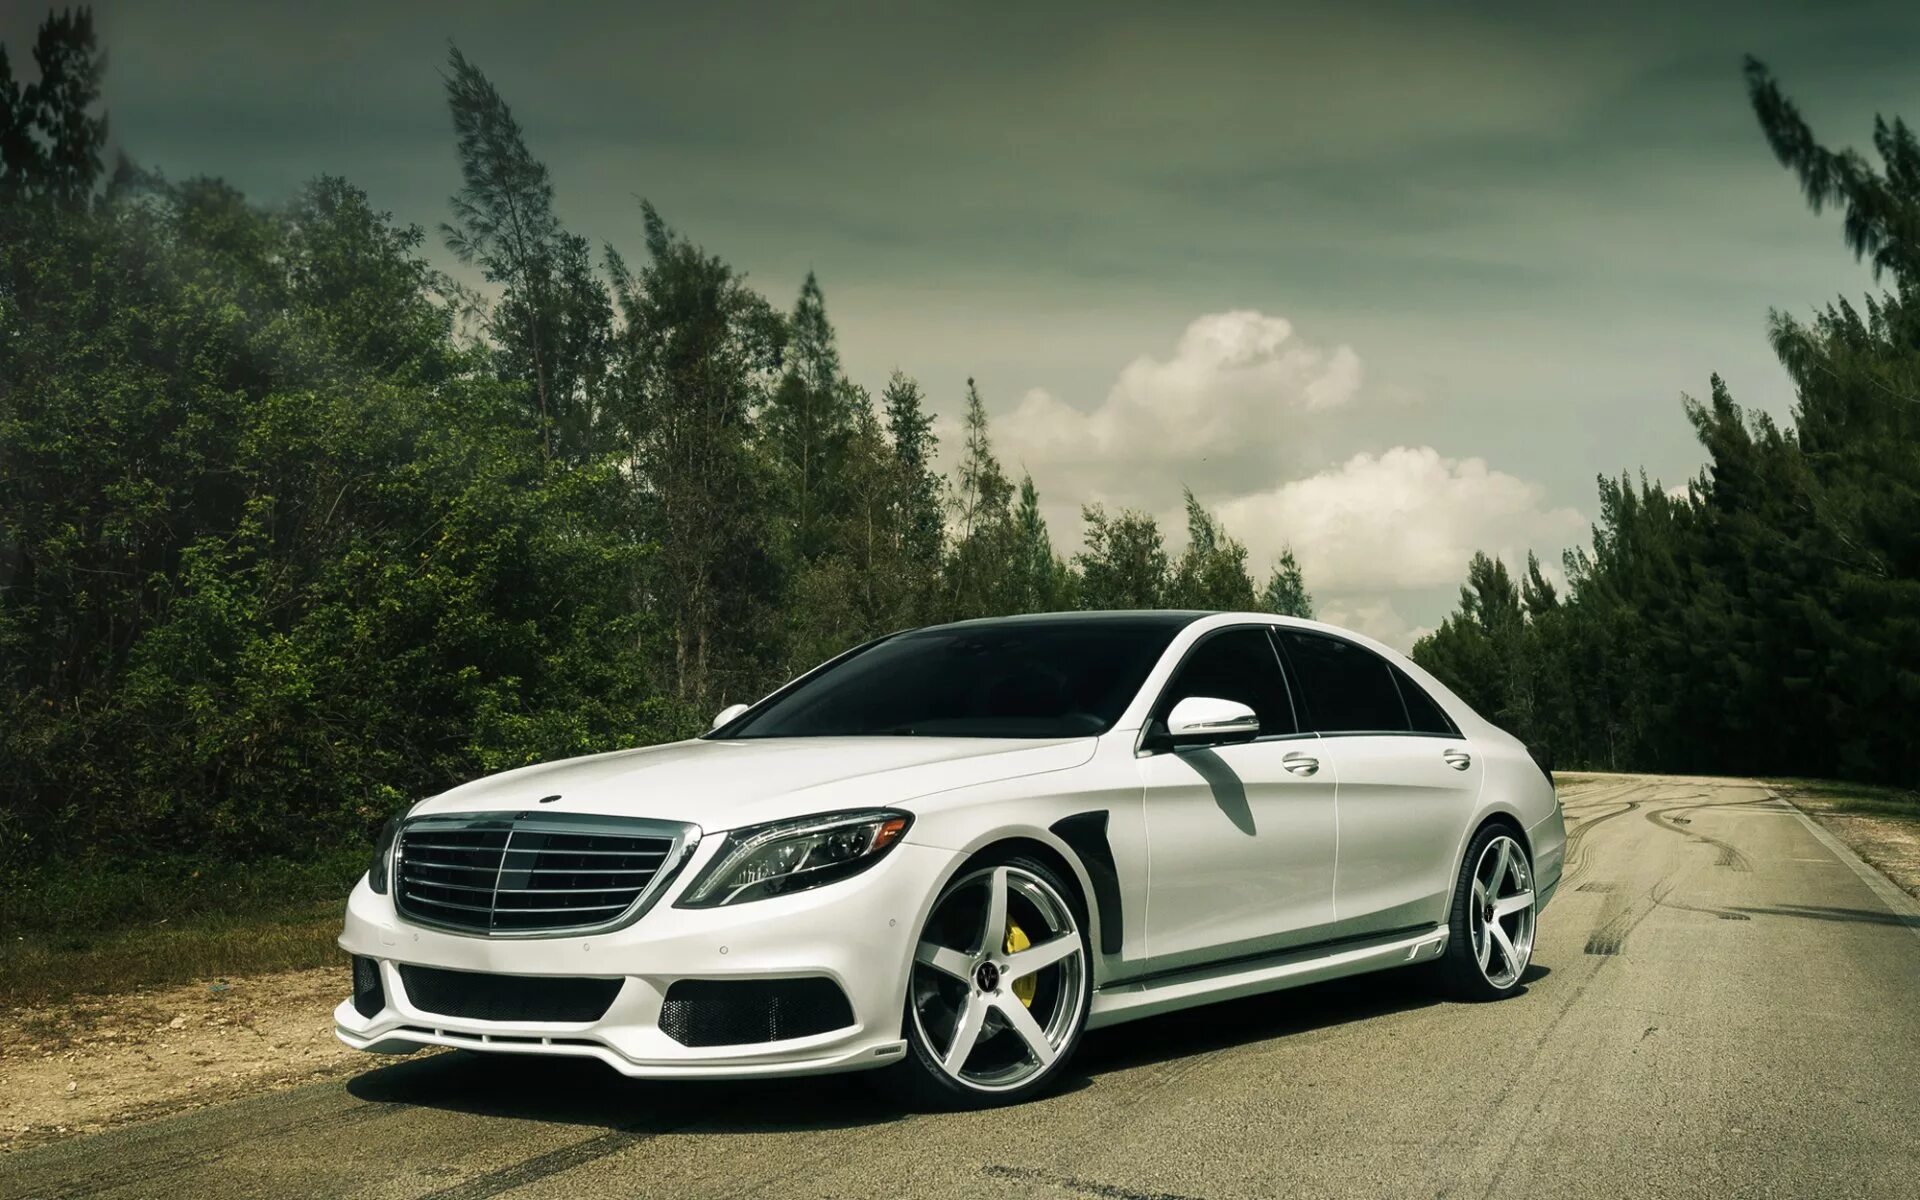 Mercedes-Benz s550. Mercedes-Benz s550 w222. Мерседес Бенц w222 s550. Мерседес s550 AMG белый.